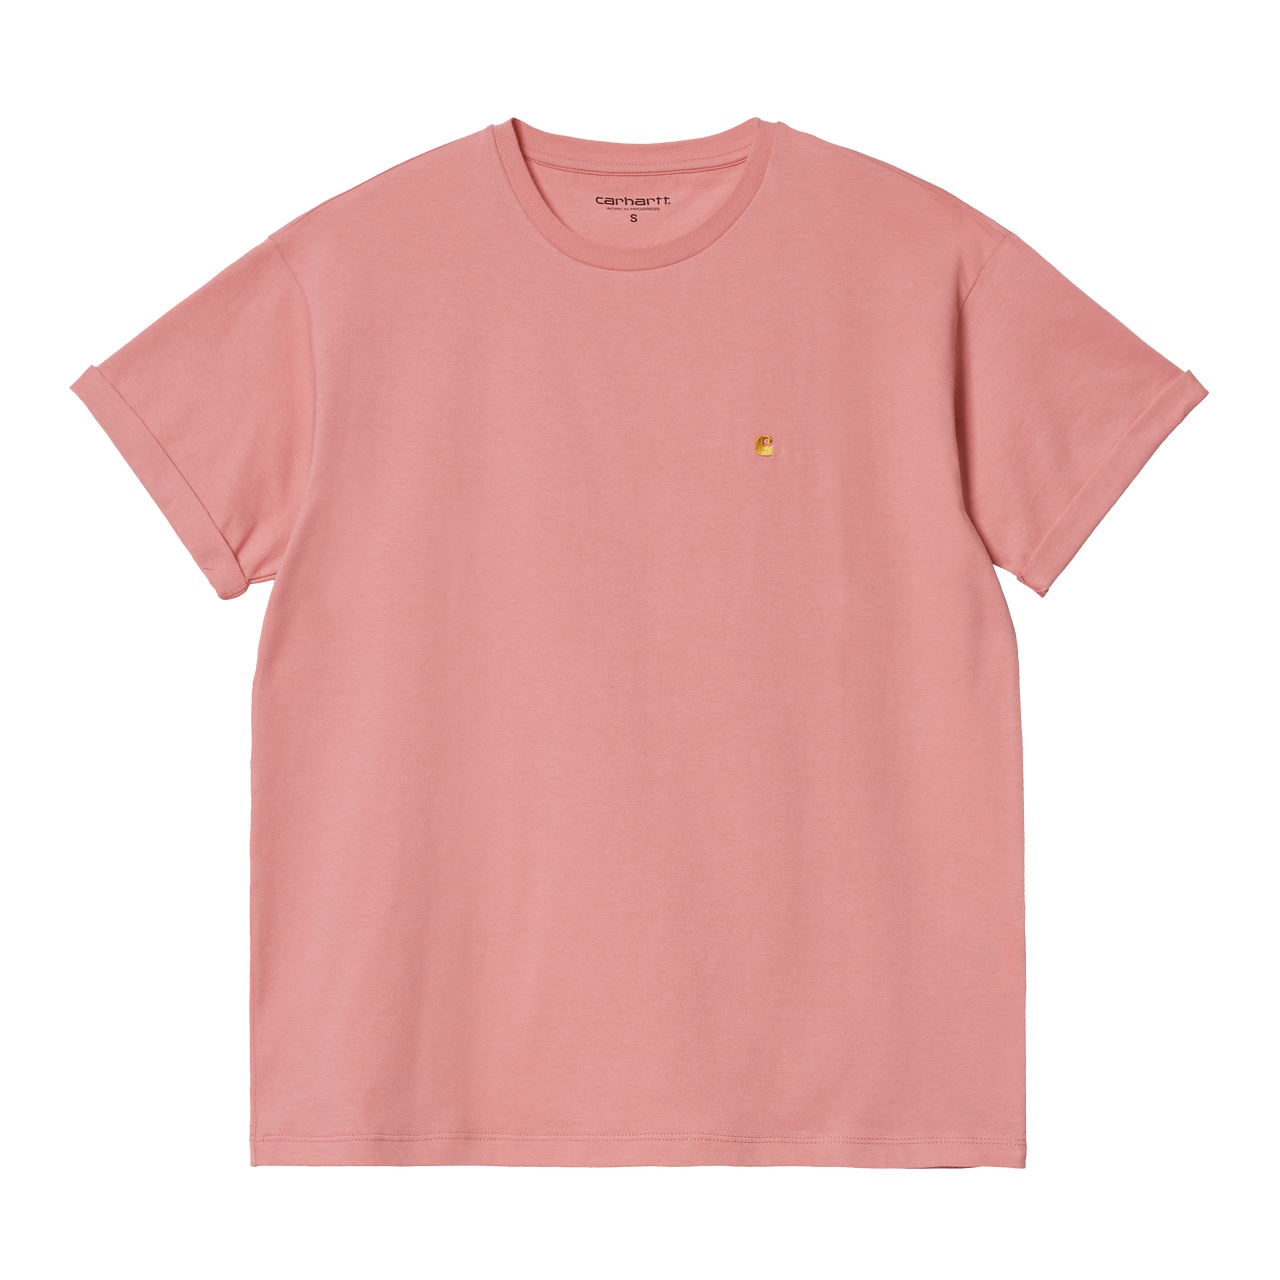 W' S/S Chase T-Shirt Rothko Pink / Gold